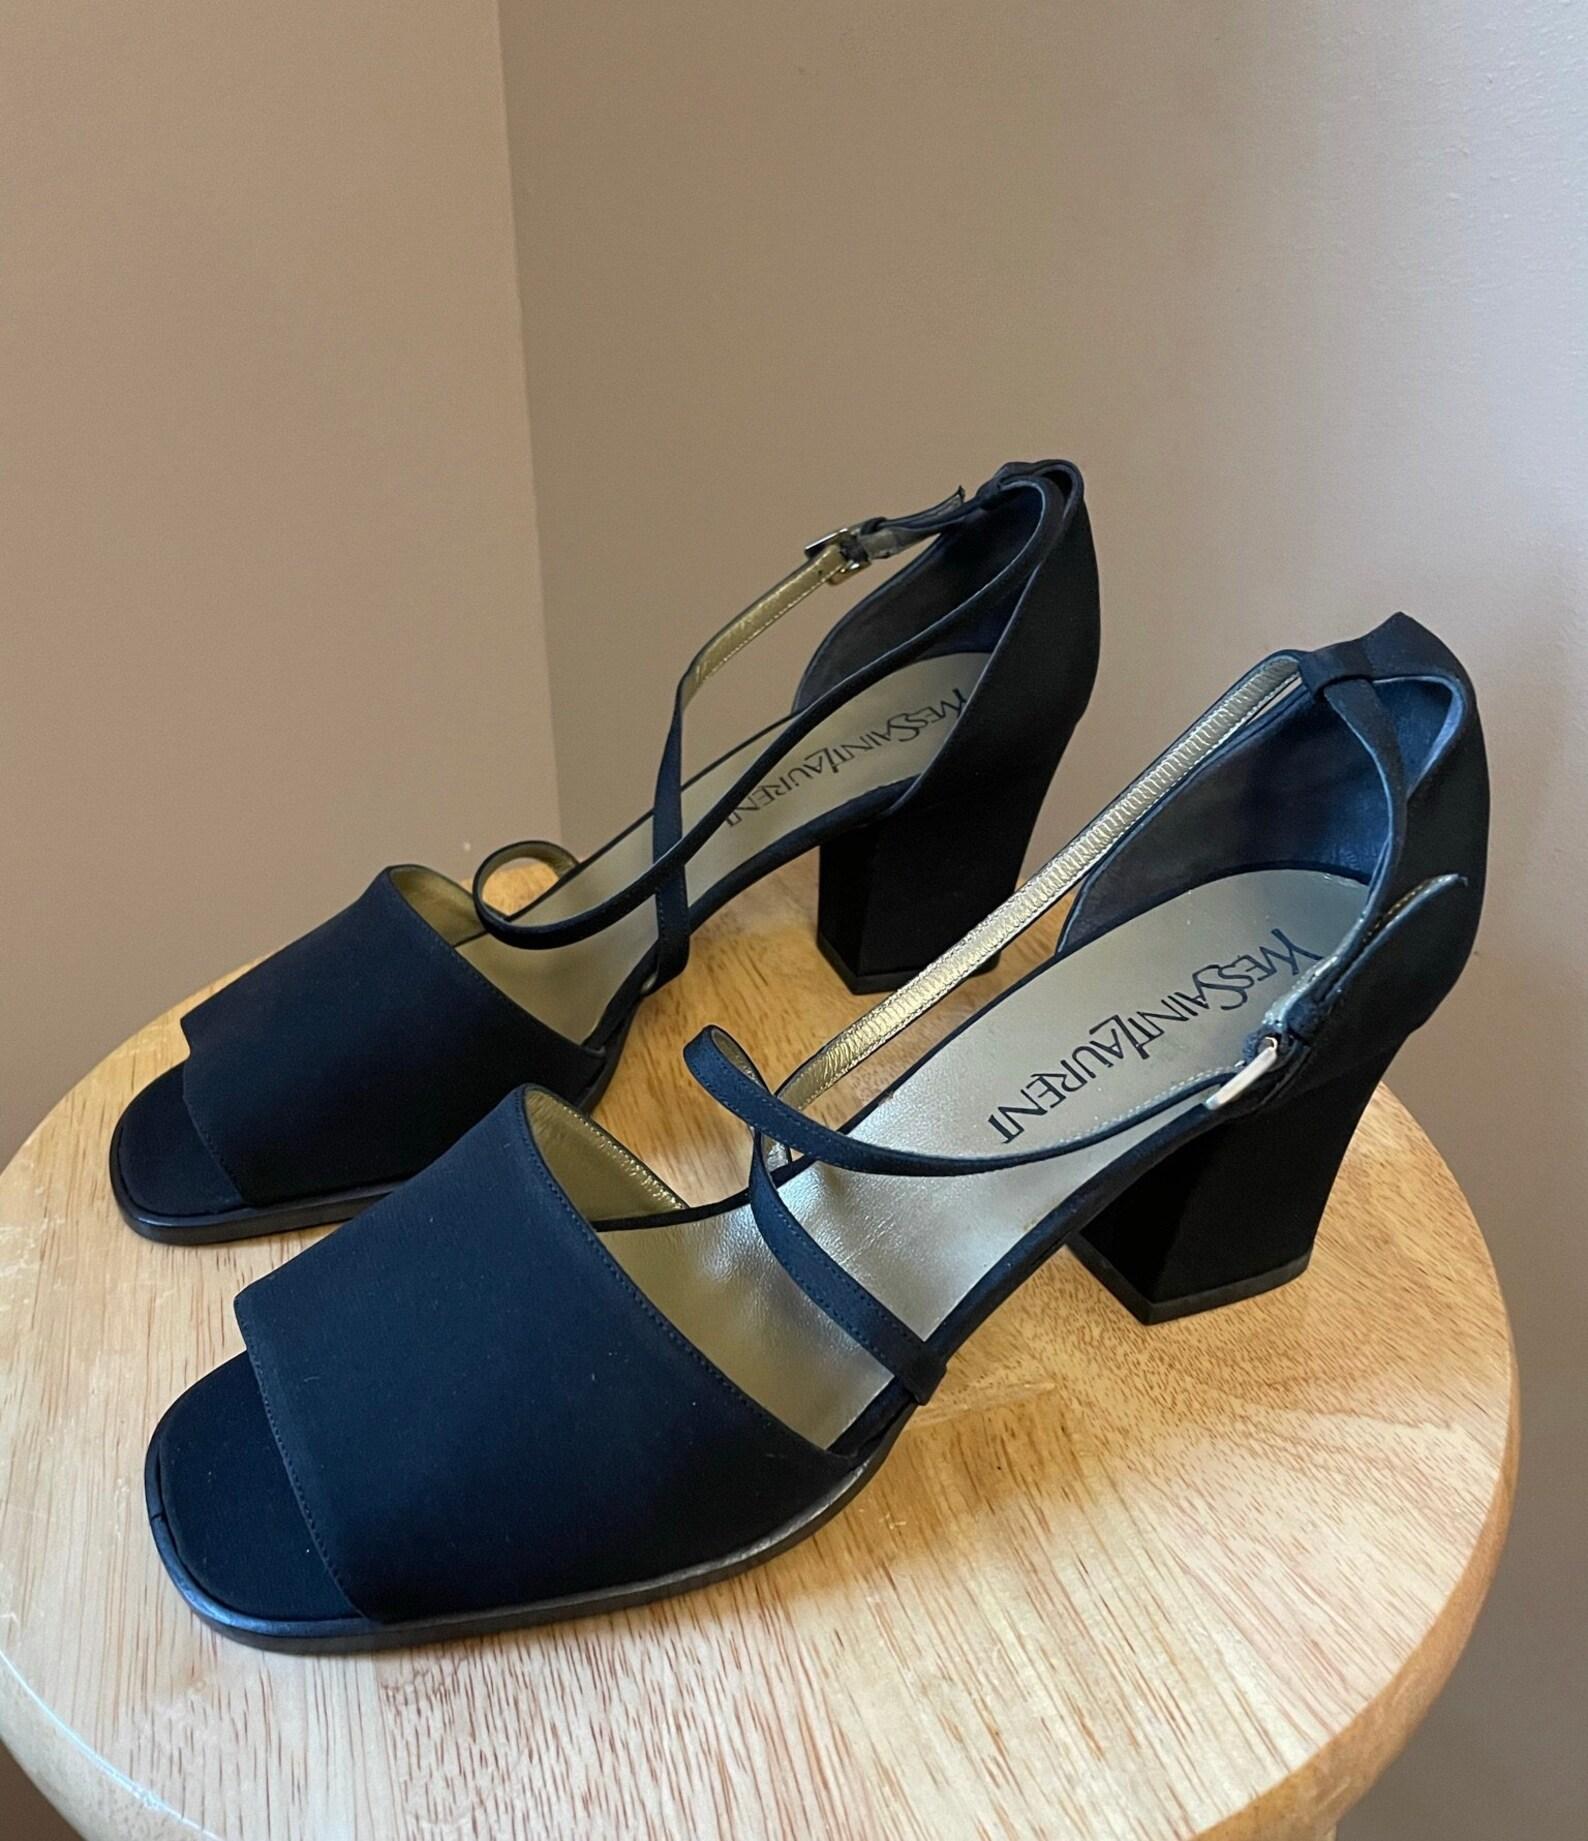 Vintage Yves Saint Laurent black open toe heels. Criss cross ankle straps. Chunky block heel.

○ Circa: 1990s
○ Label: Yves Saint Laurent
○ Material: Fabric Uppers (Feels like Silk), Leather
○ Color: Black
○ Excellent Condition! New Old Stock in